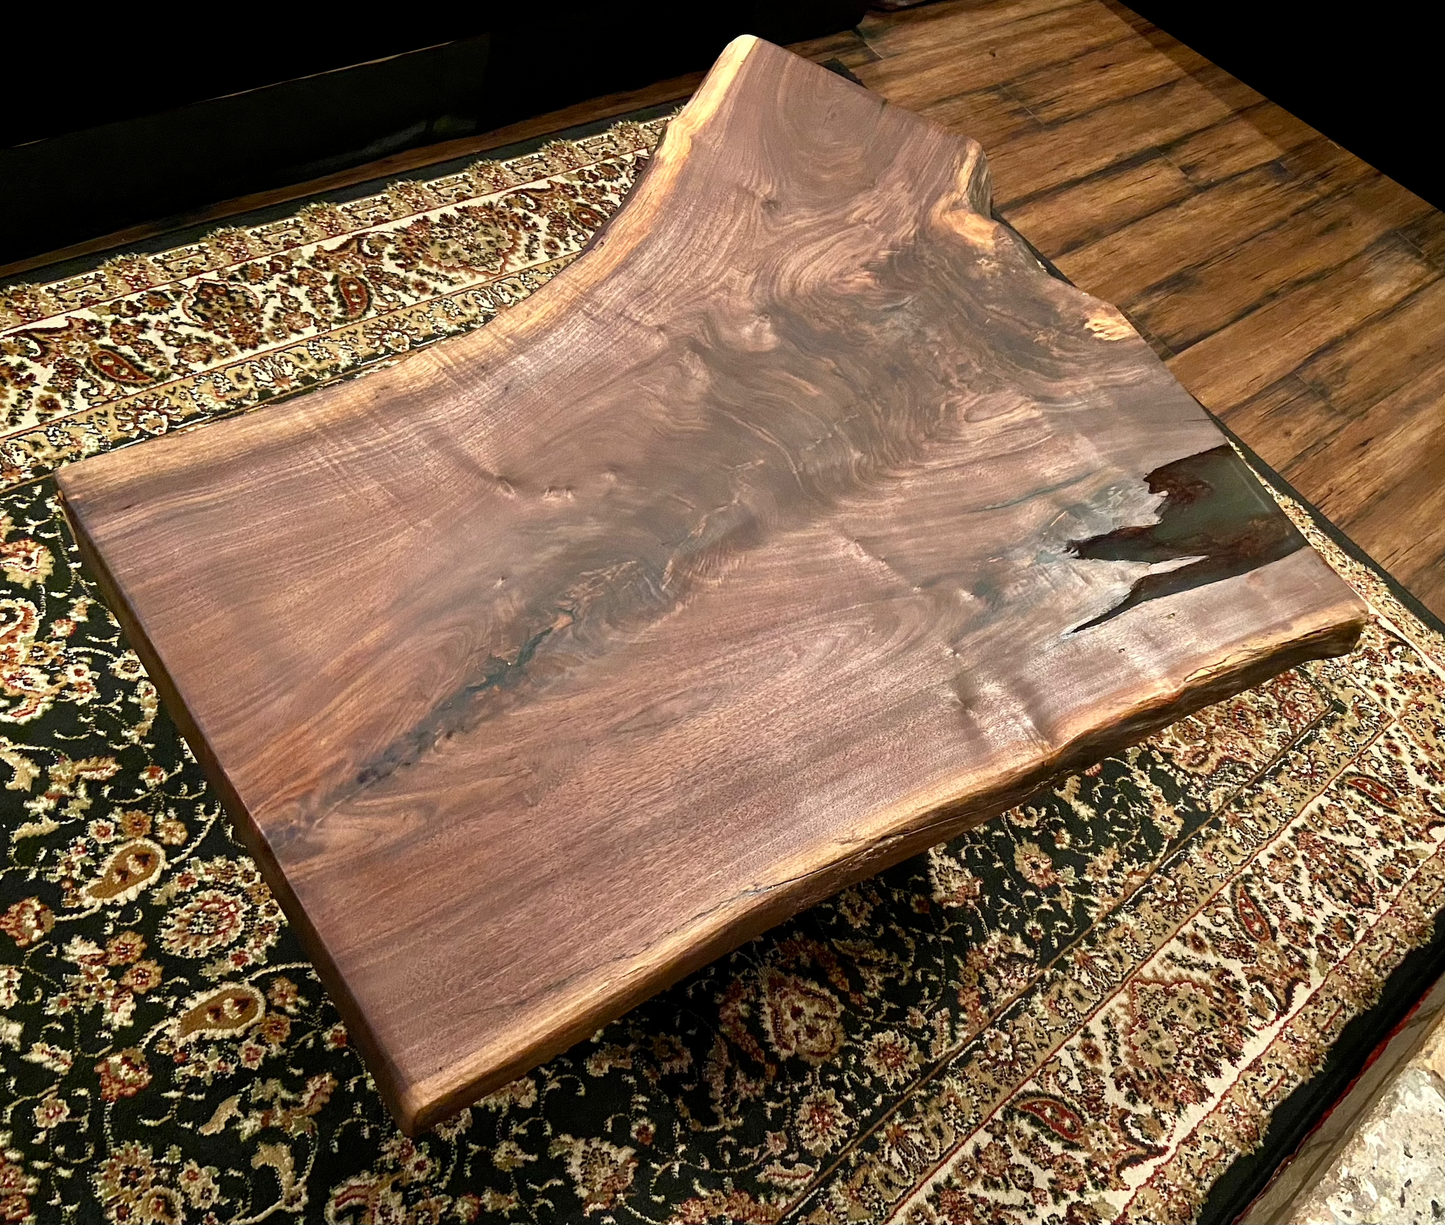 Naturally Curved Live Edge Walnut Coffee Table|Live Edge Wood Coffee Table|Natural Edge Black Walnut Table|Live Edge Rustic Walnut Table